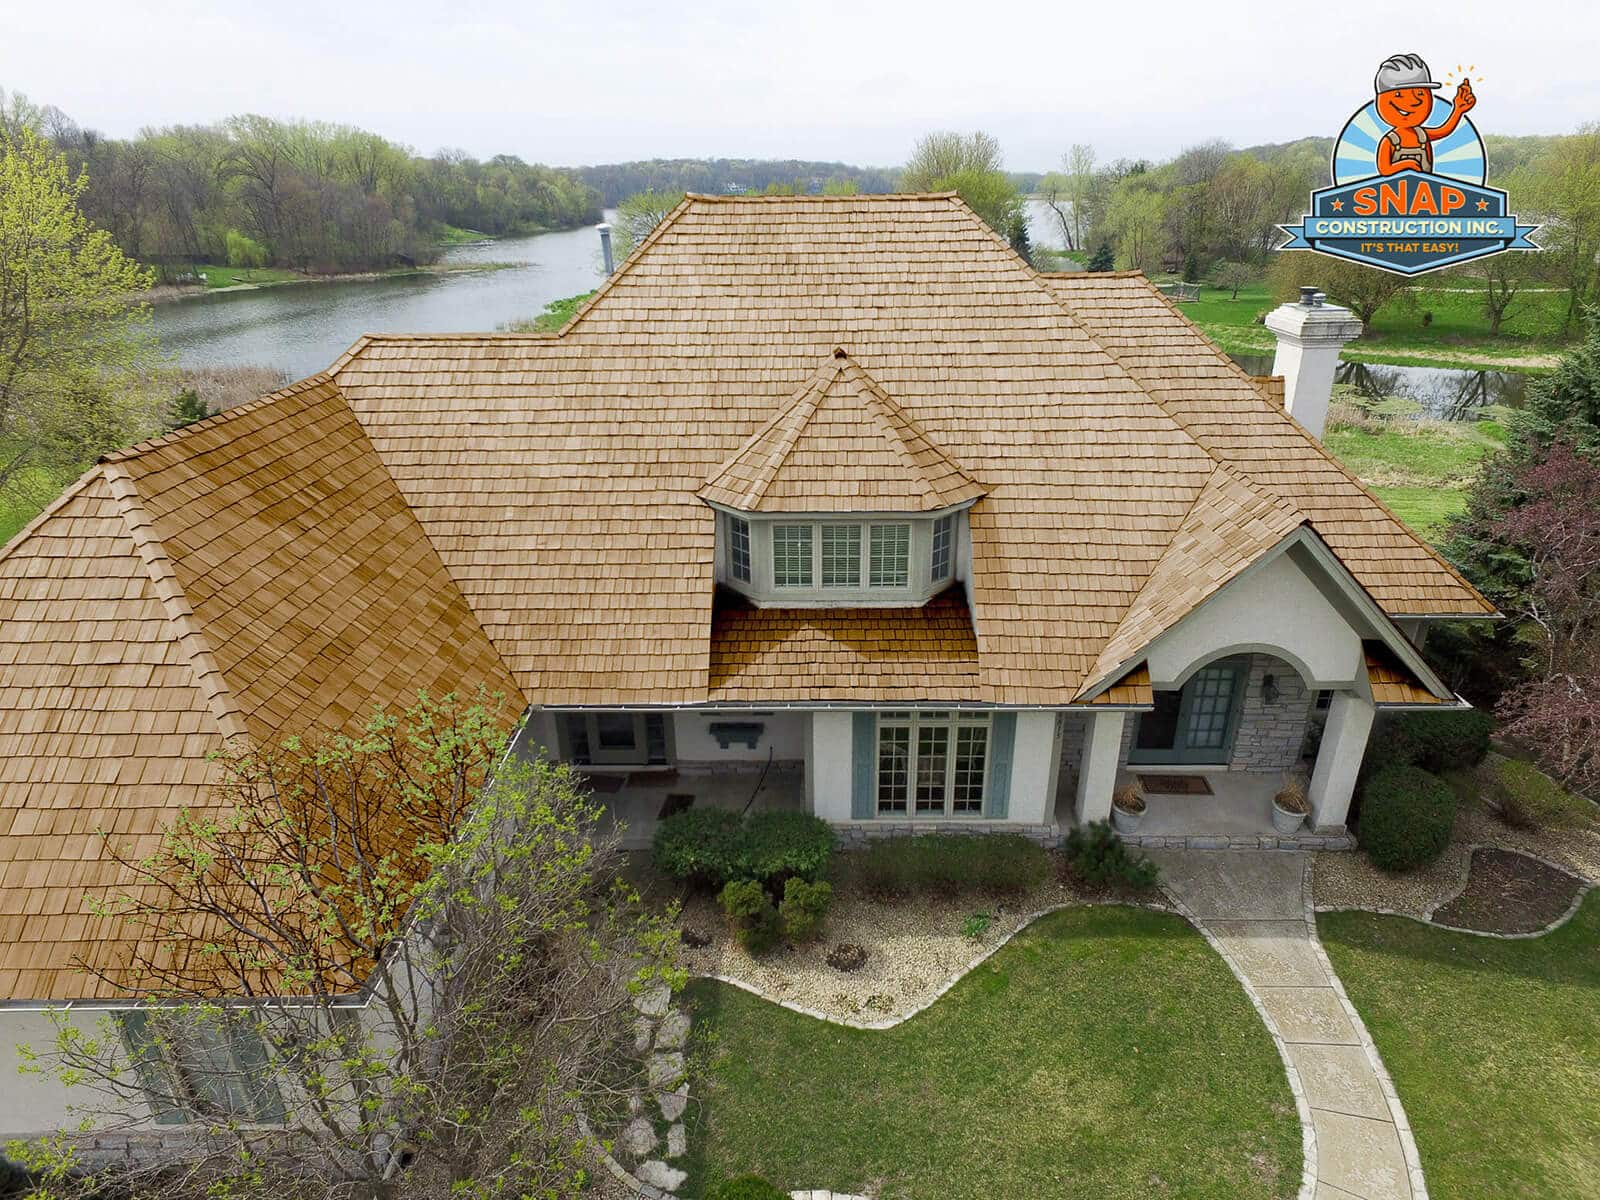 A large home with wood shake roofing has a lake in the background.